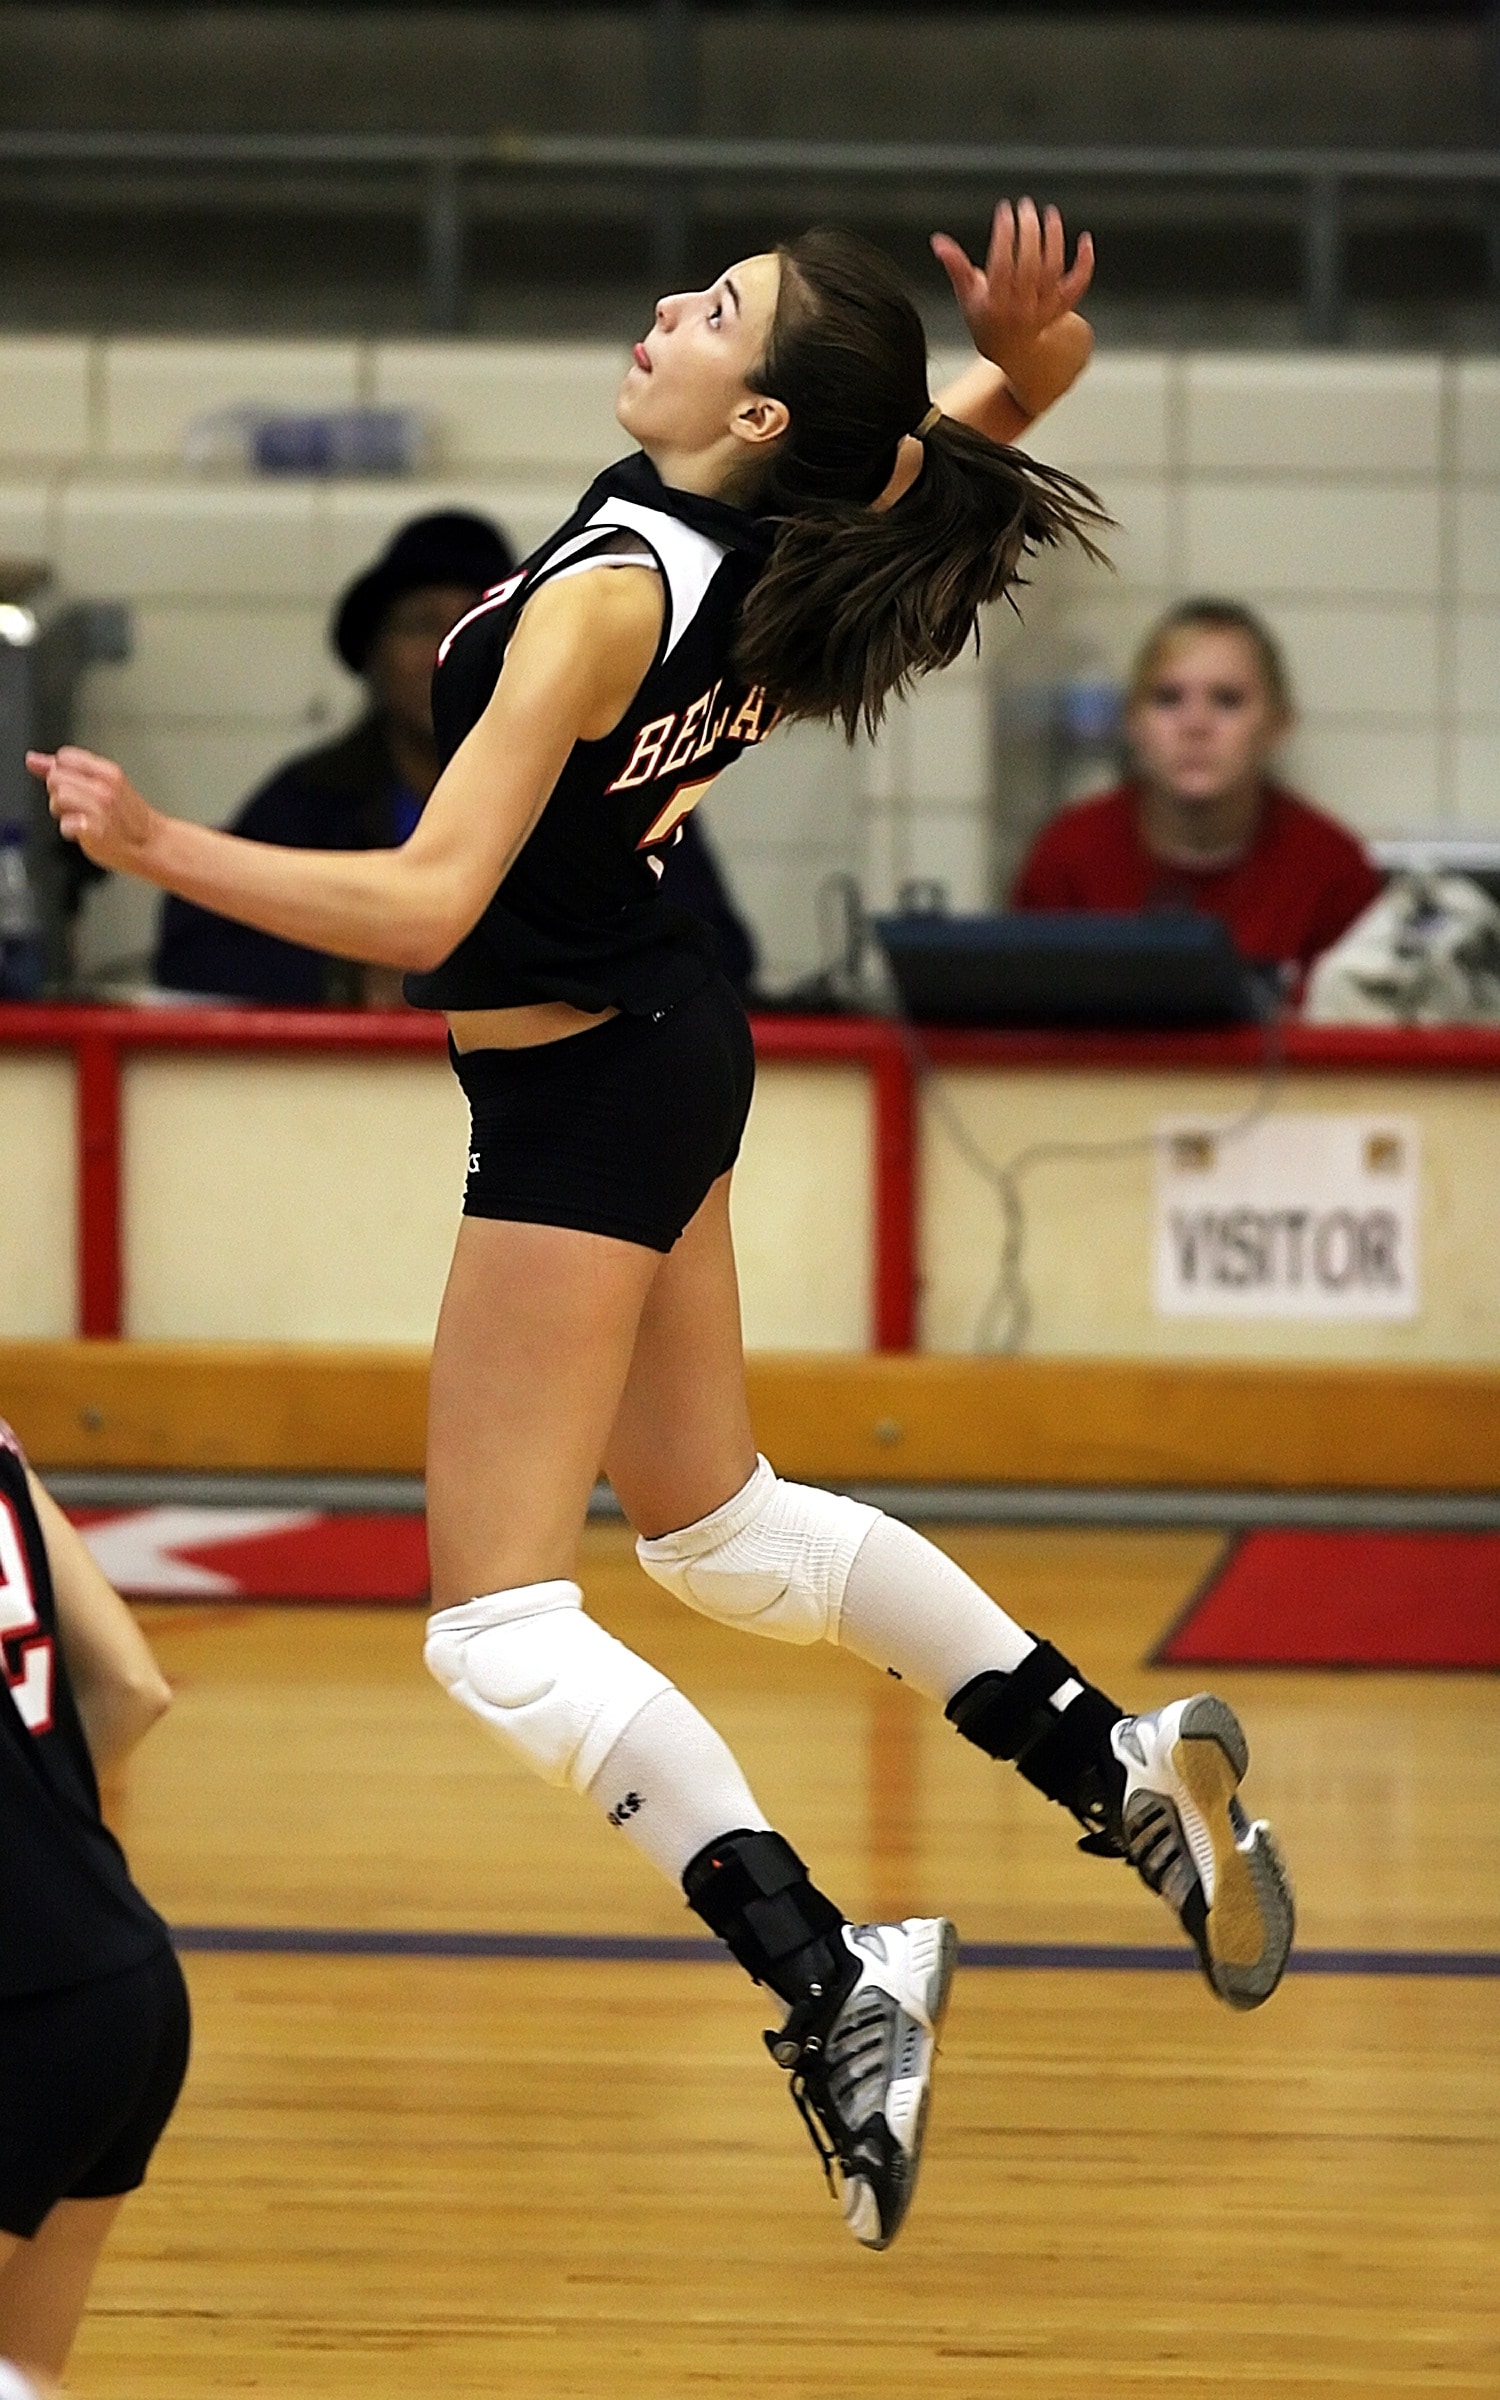 Volleyball, Athlete, Player, Spike, sport, motion